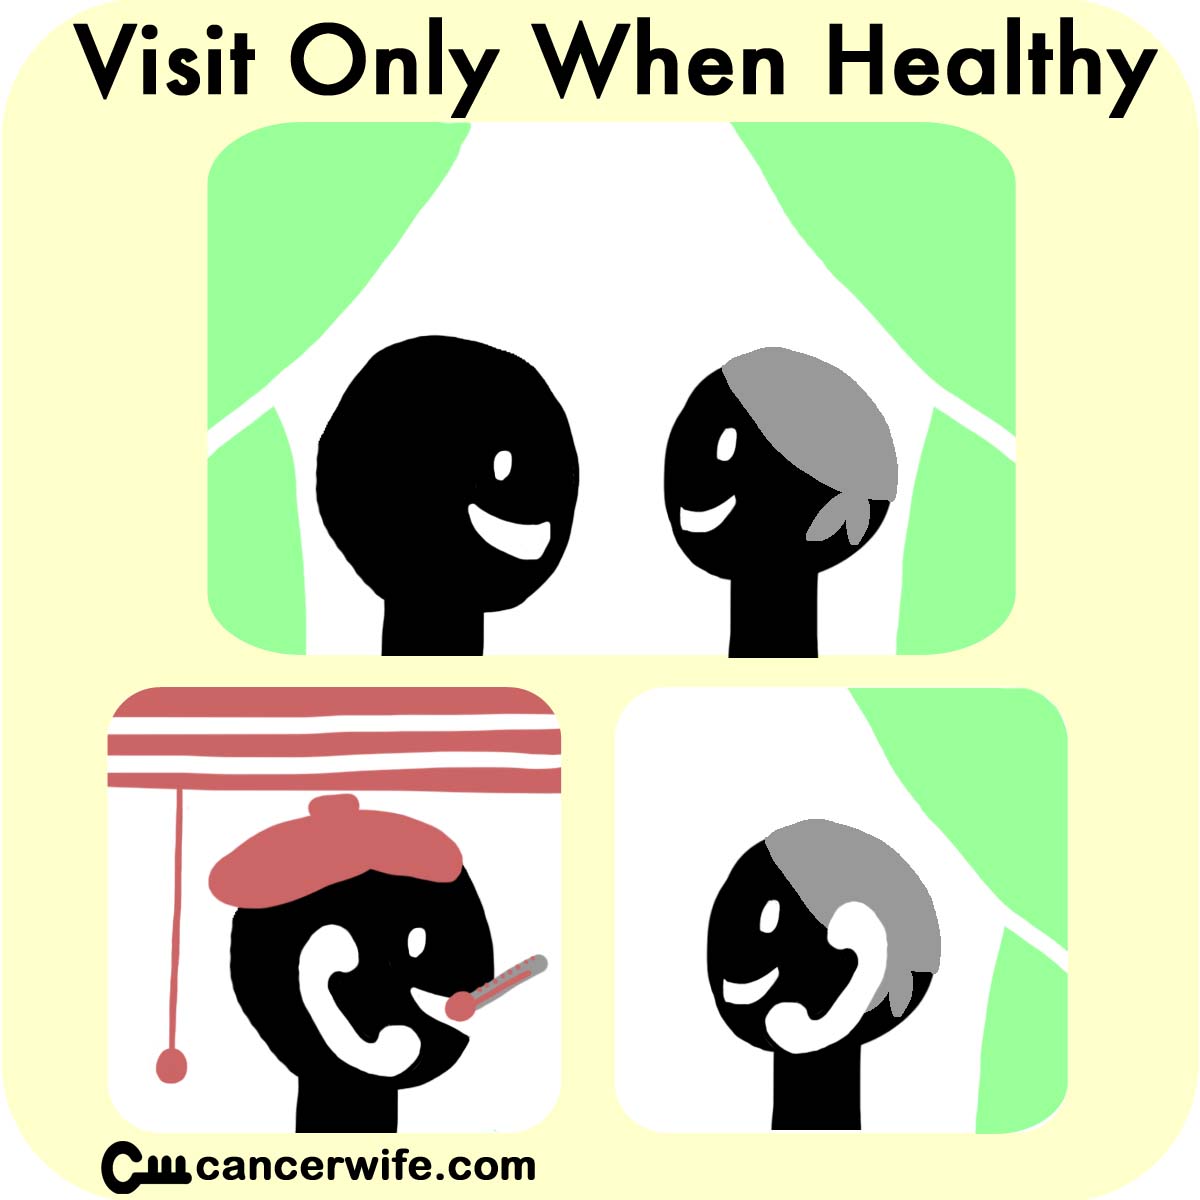 Tipsfor visitmg cancer patients, only visit when healthy